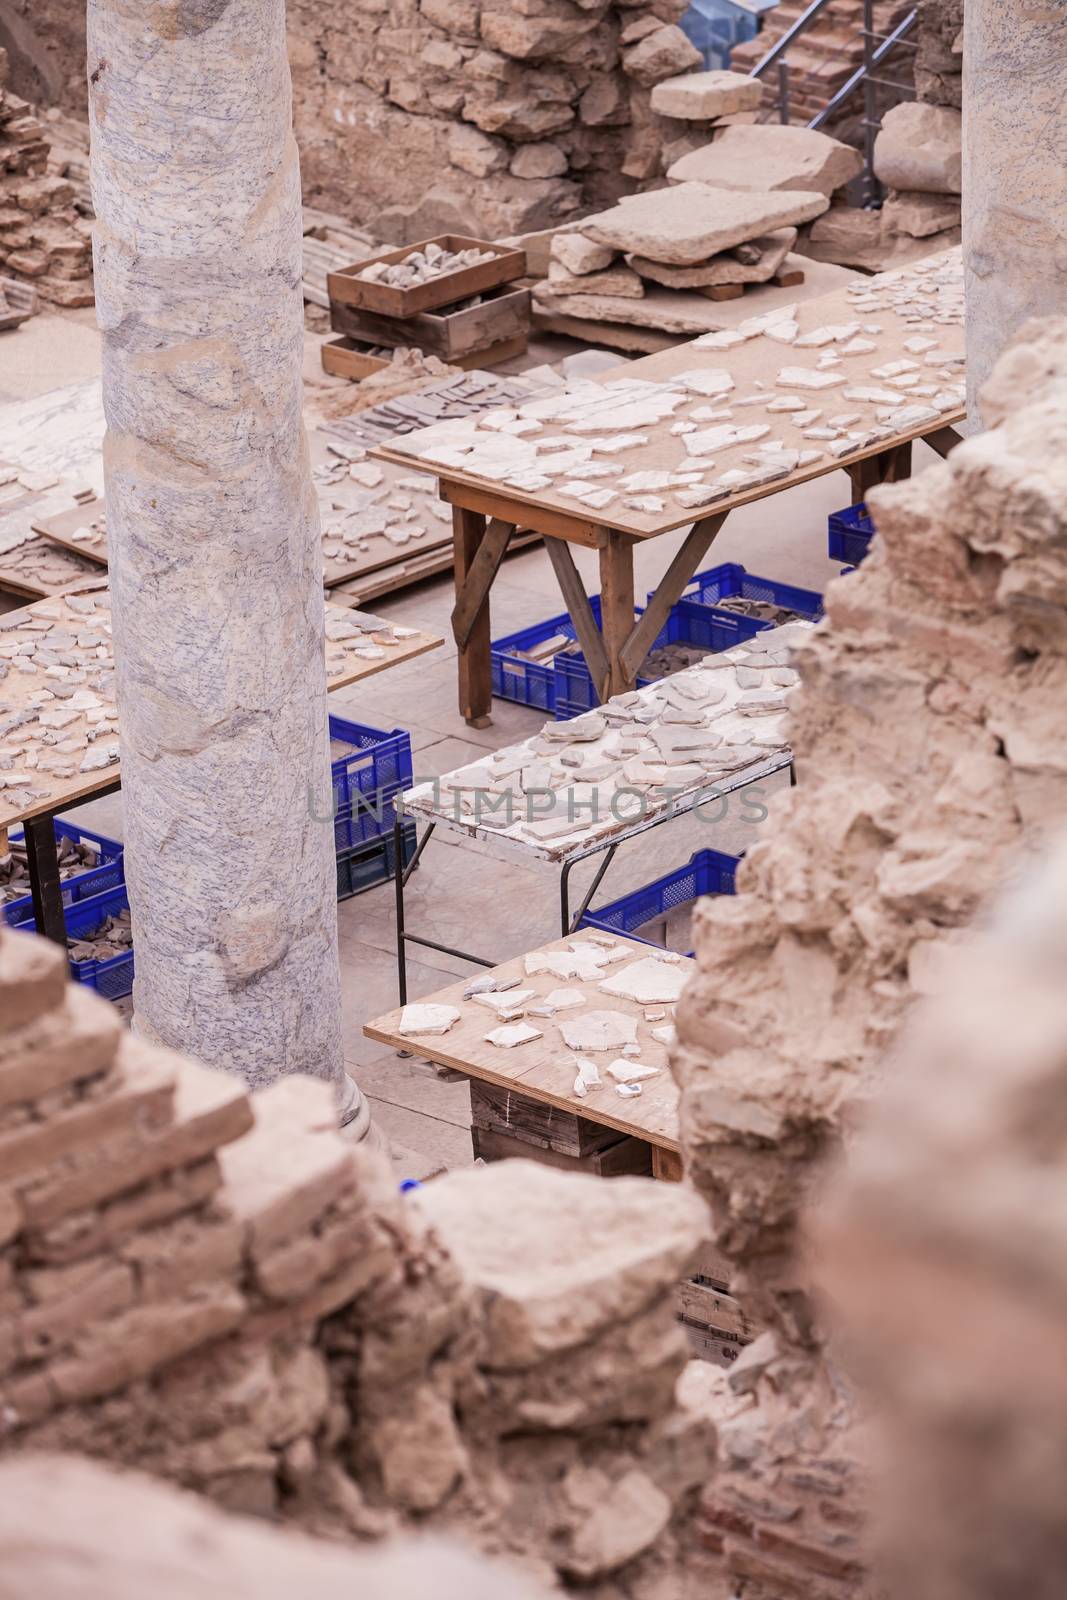 Tables with ceramic shards at archeological site in Turkey